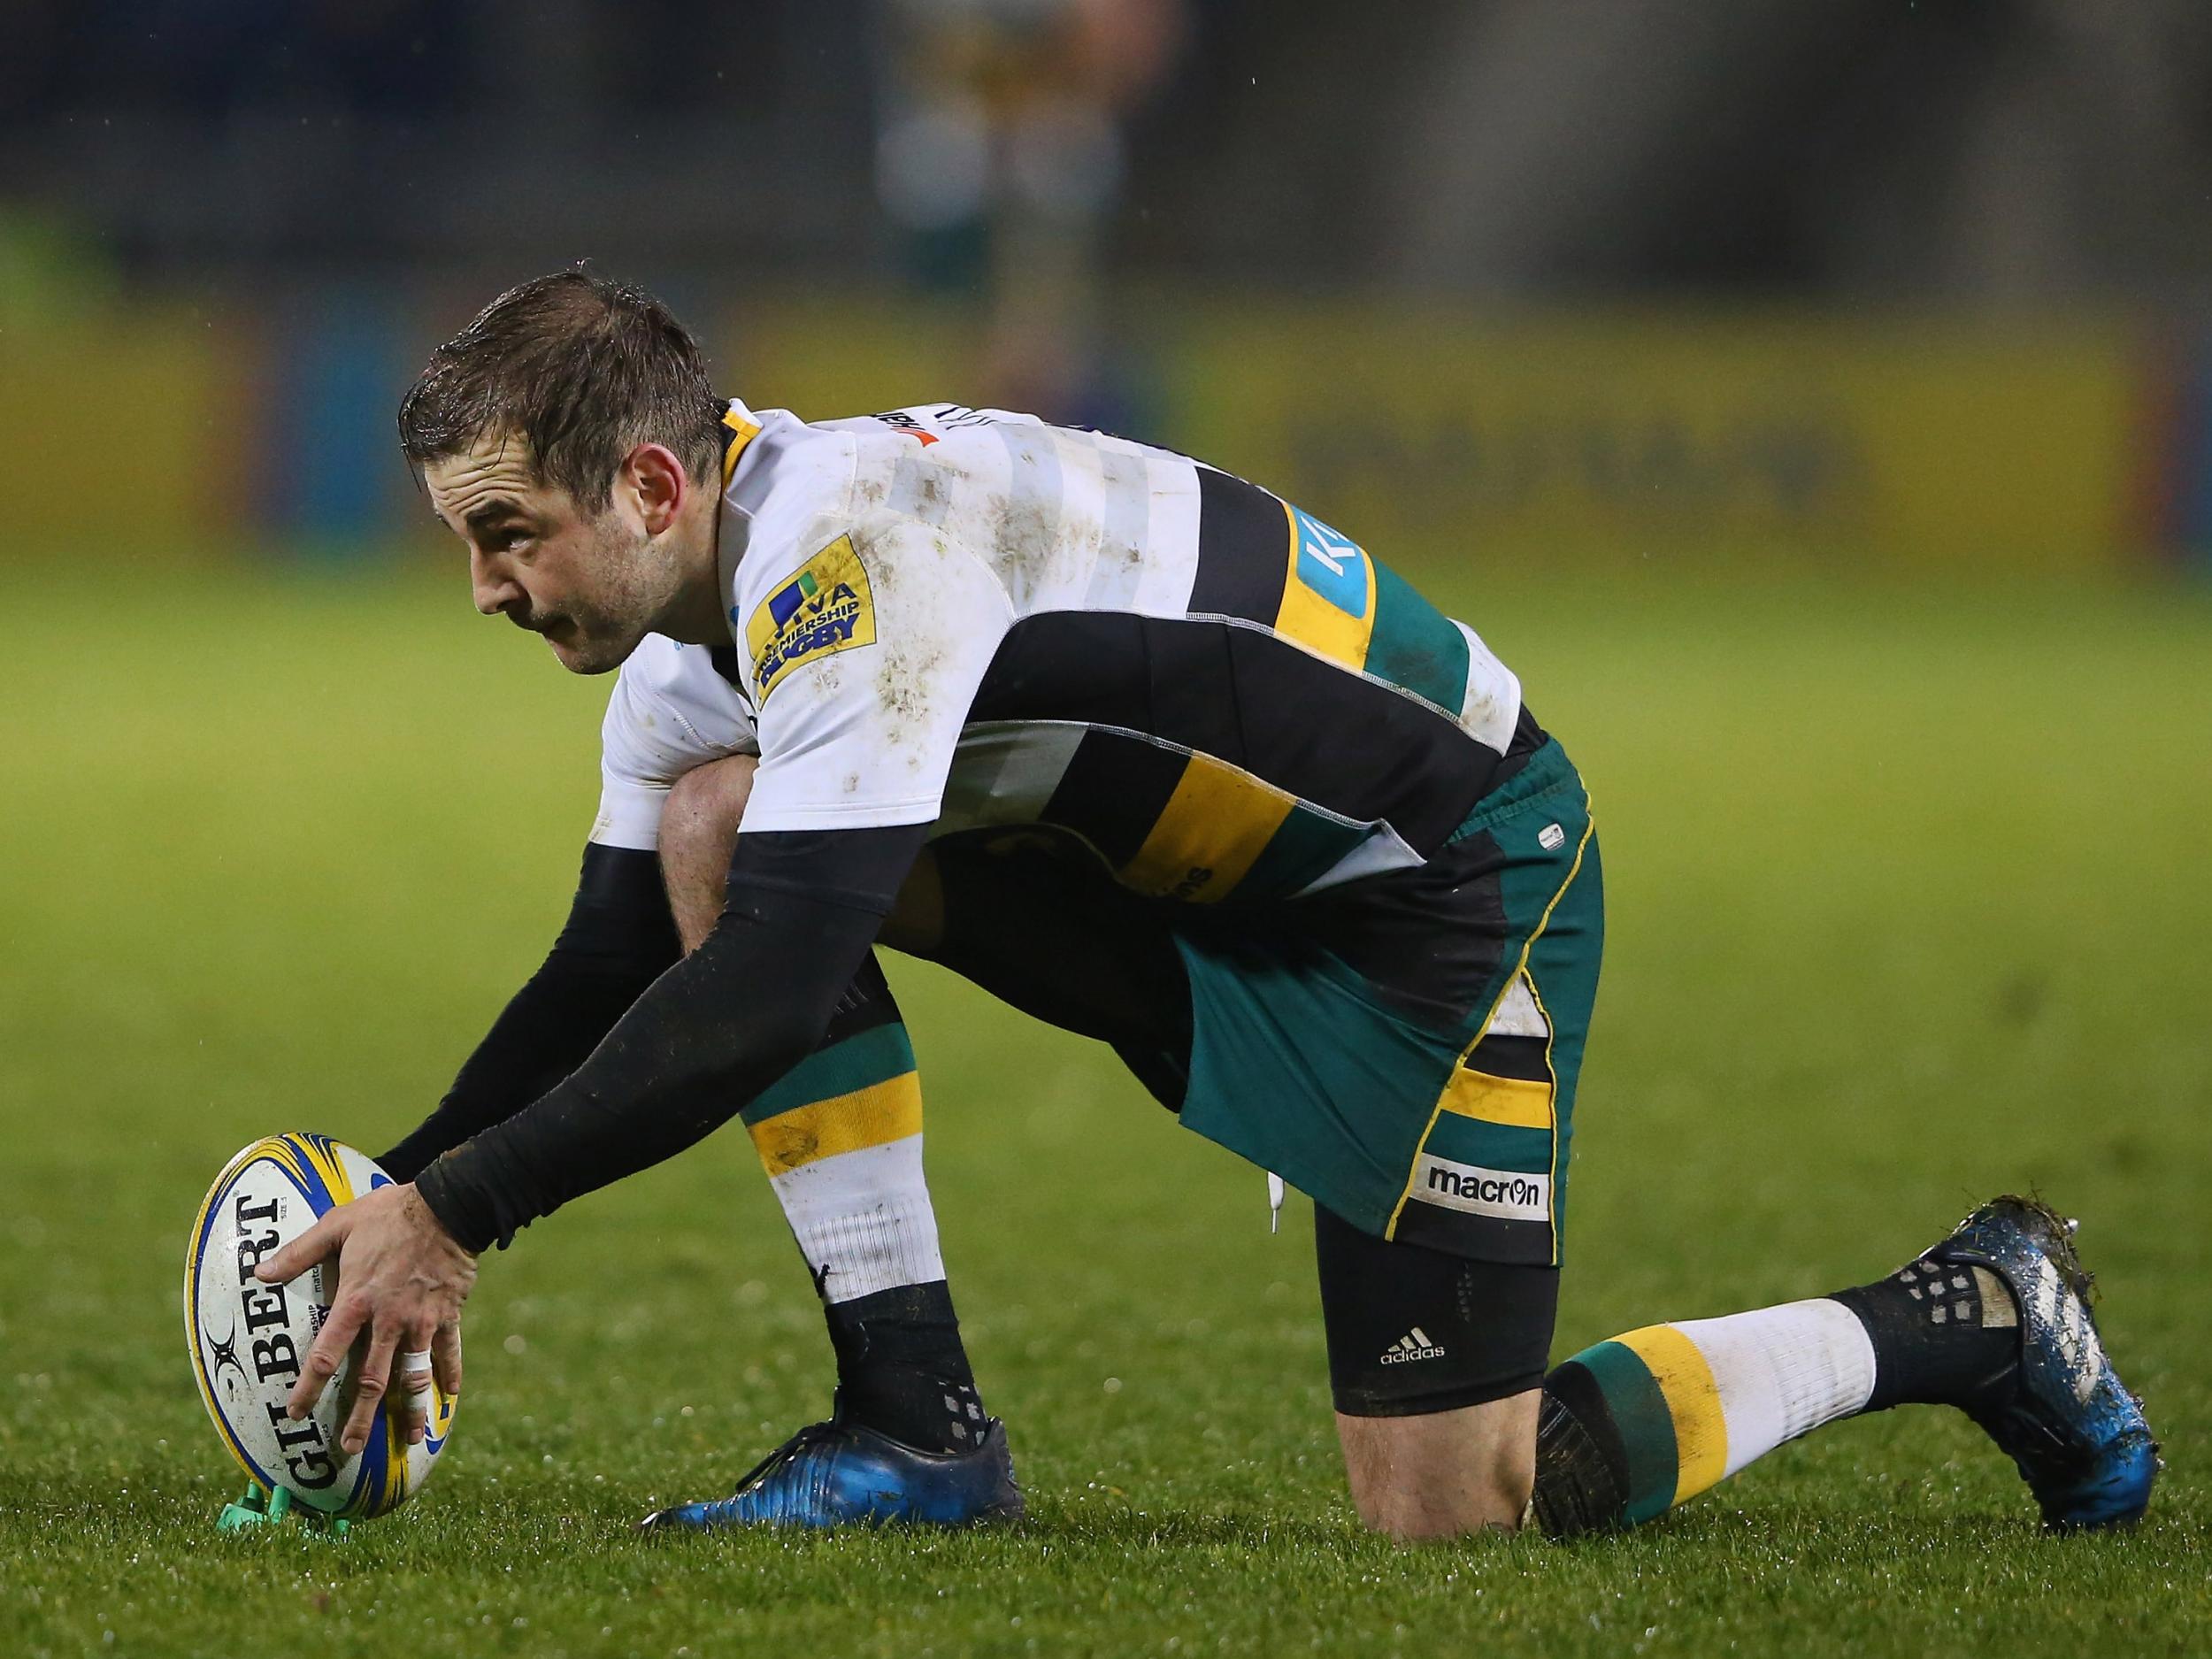 Stephen Myler kicked 12 points from the tee